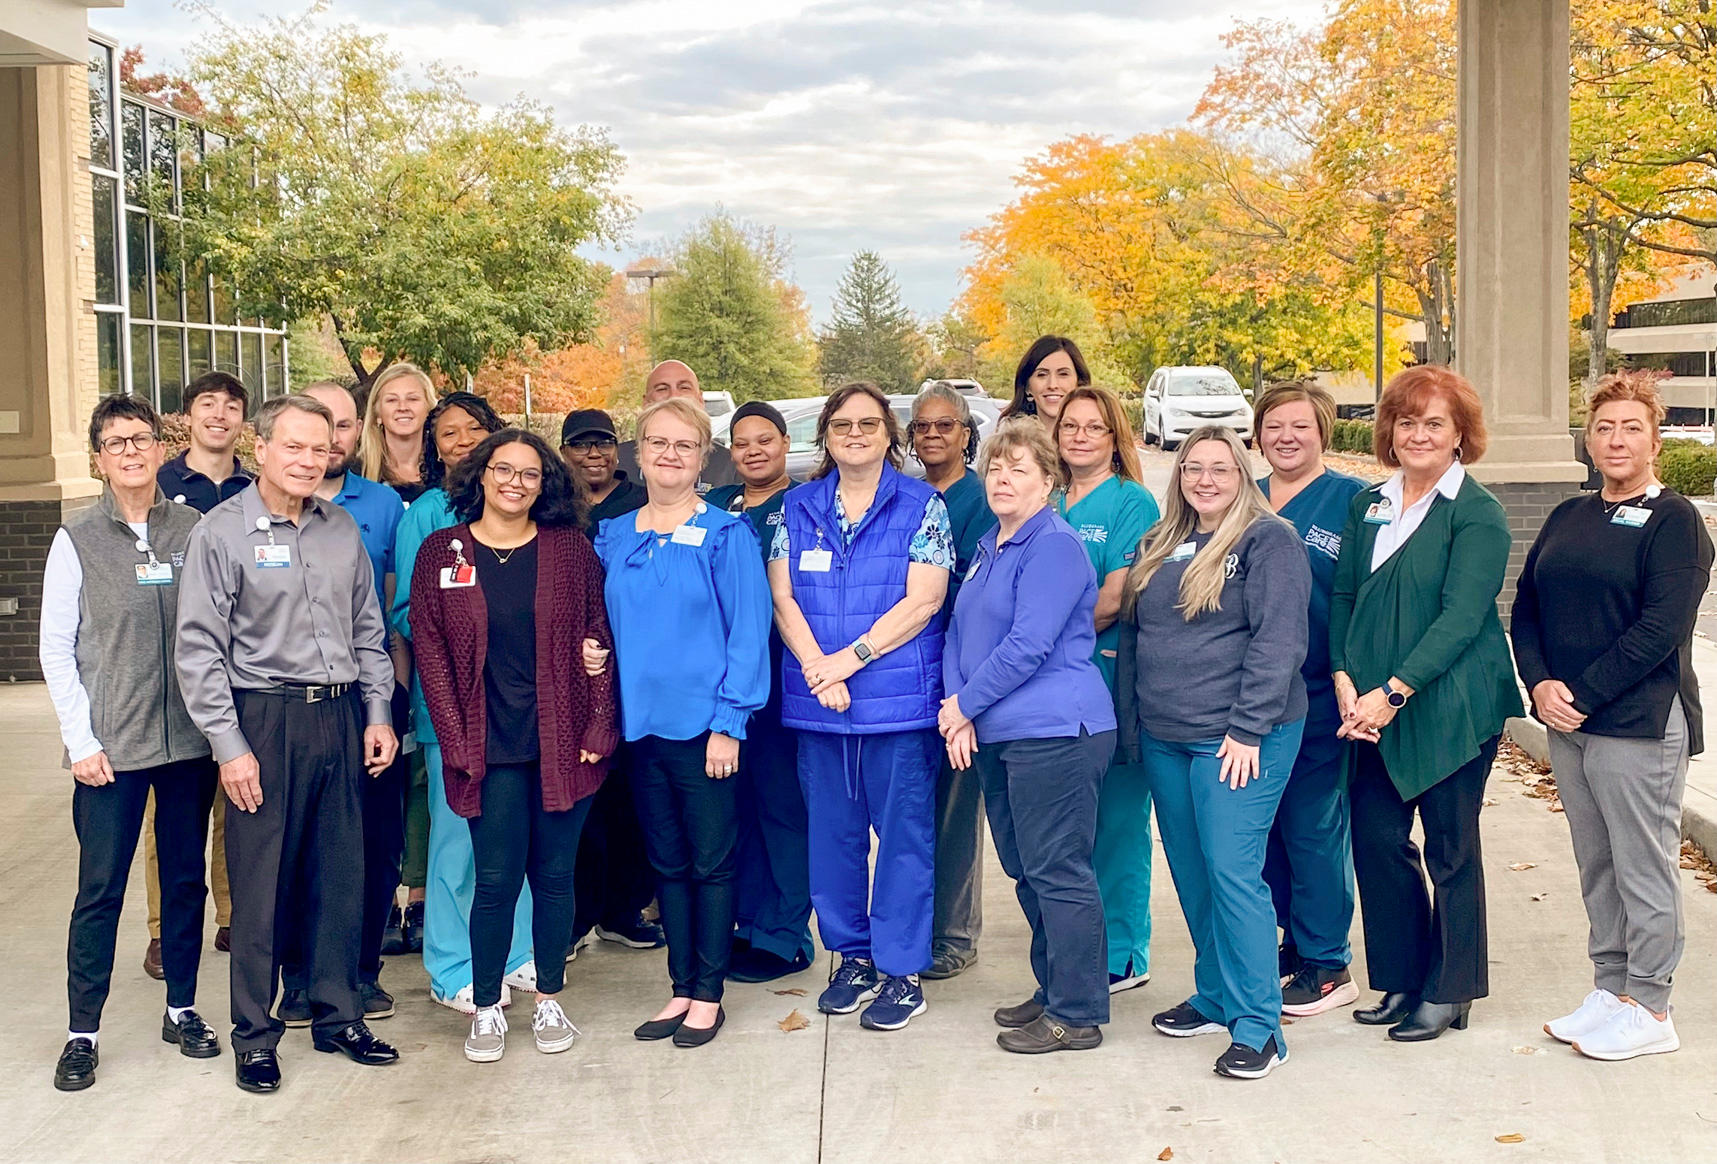 Bluegrass PACE Care provides a healthcare team, an all-inclusive plan customized to your needs, transportation to and from the PACE Center and all authorized medical appointments. Meals, social activities and personal care are provided at the PACE Center.